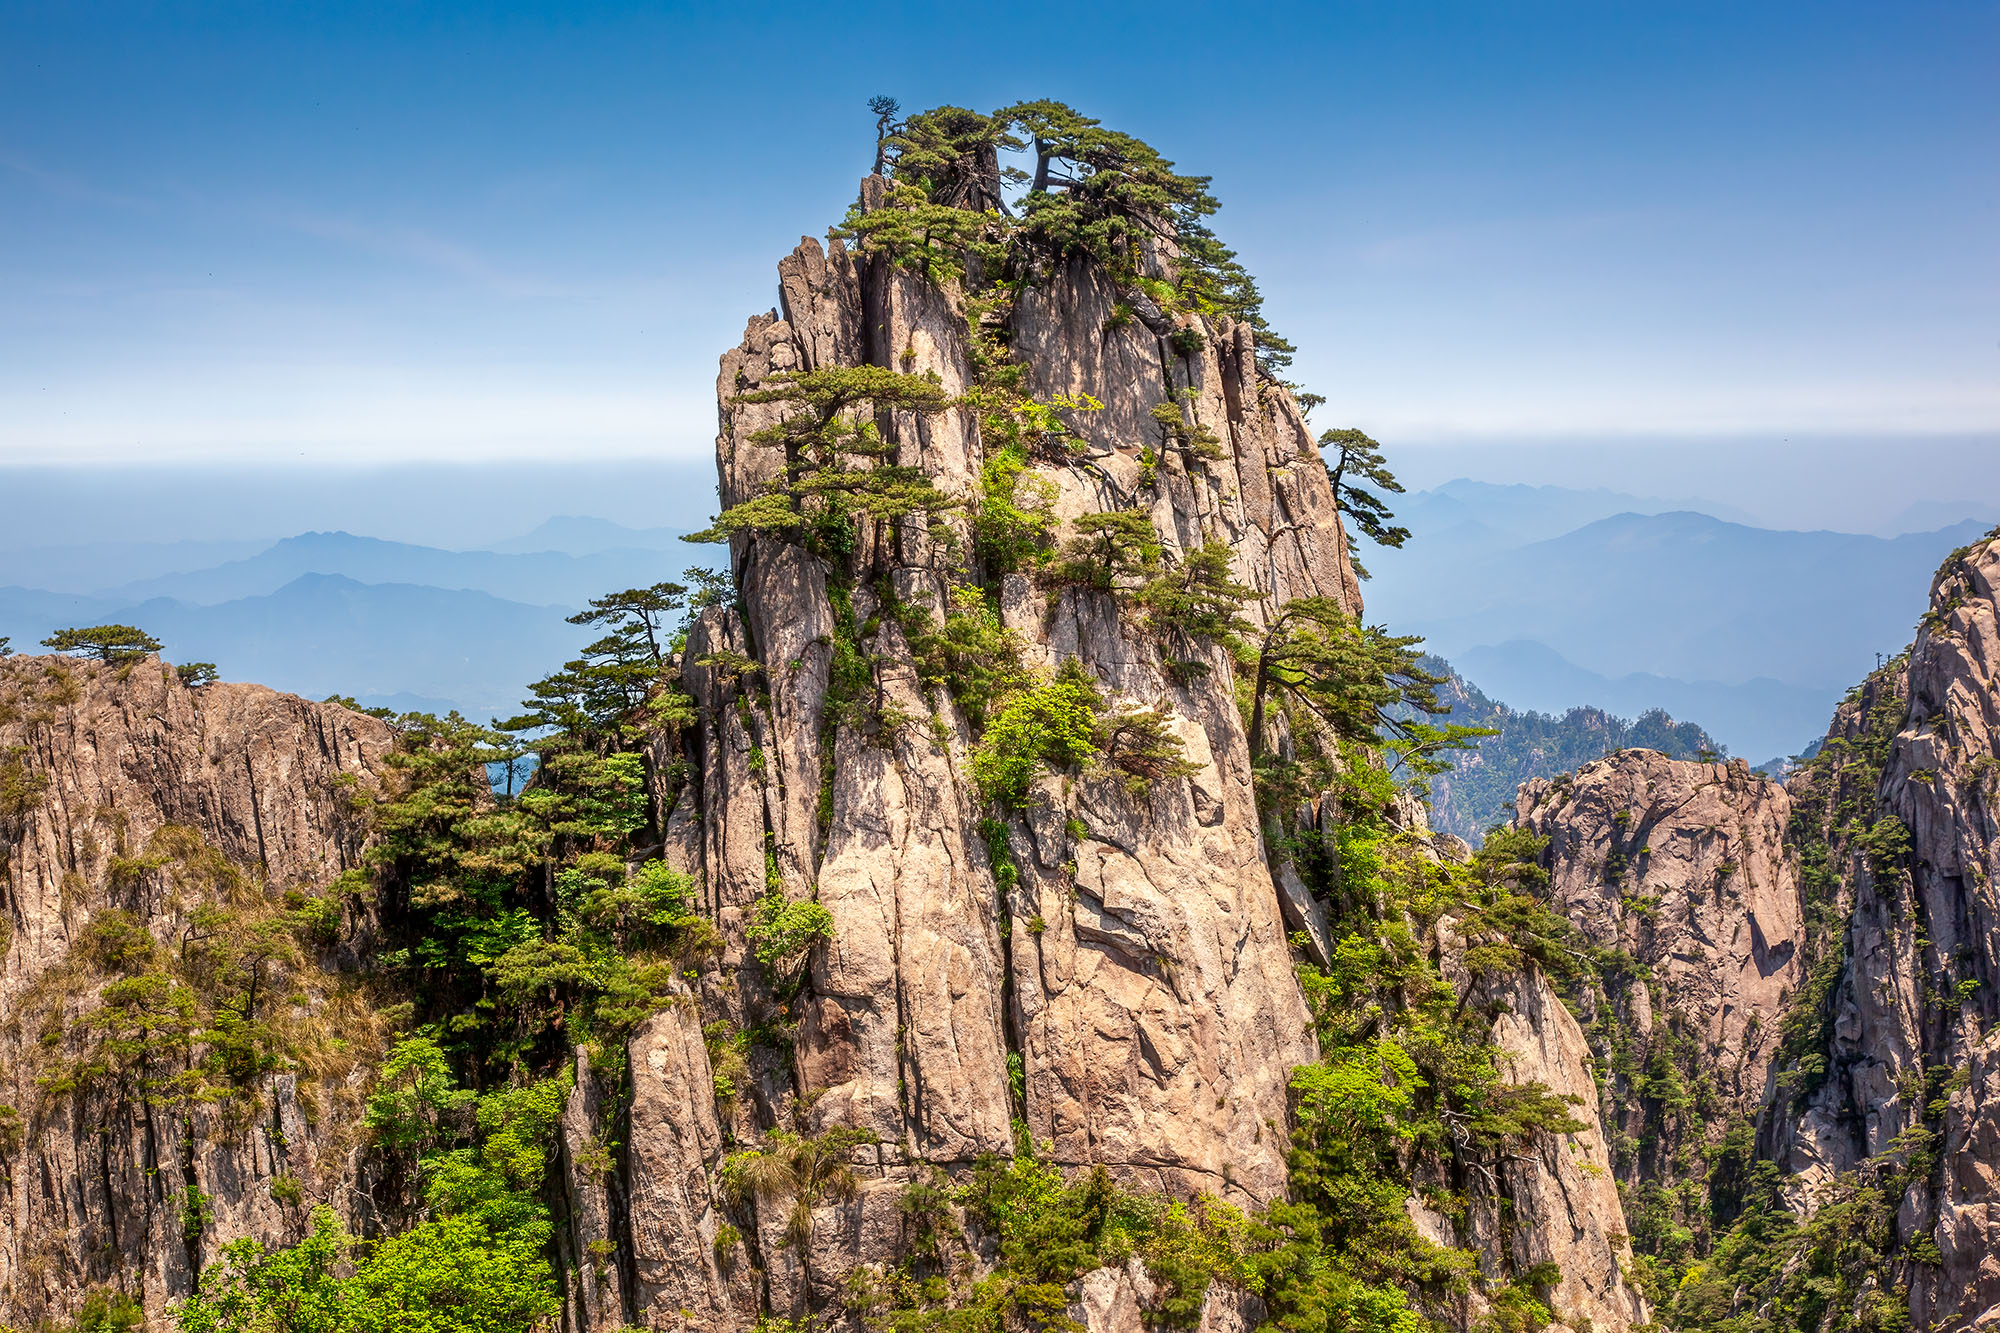 This image, captured in the East Sea Yellow Mountains of Mount Huangshan, China, unveils the rugged beauty of nature. In the...